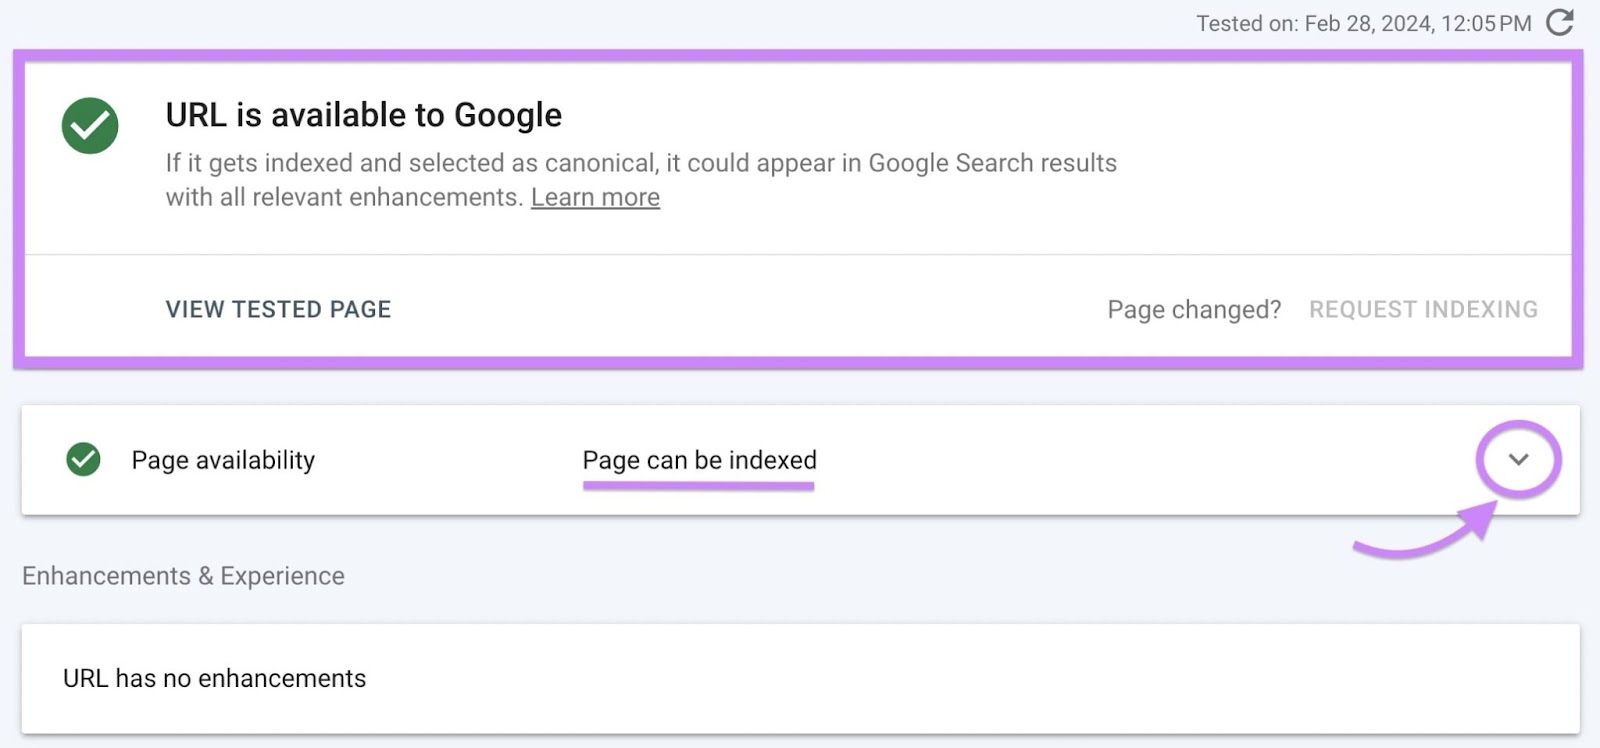 “Page availability” status showing “Page can be indexed”